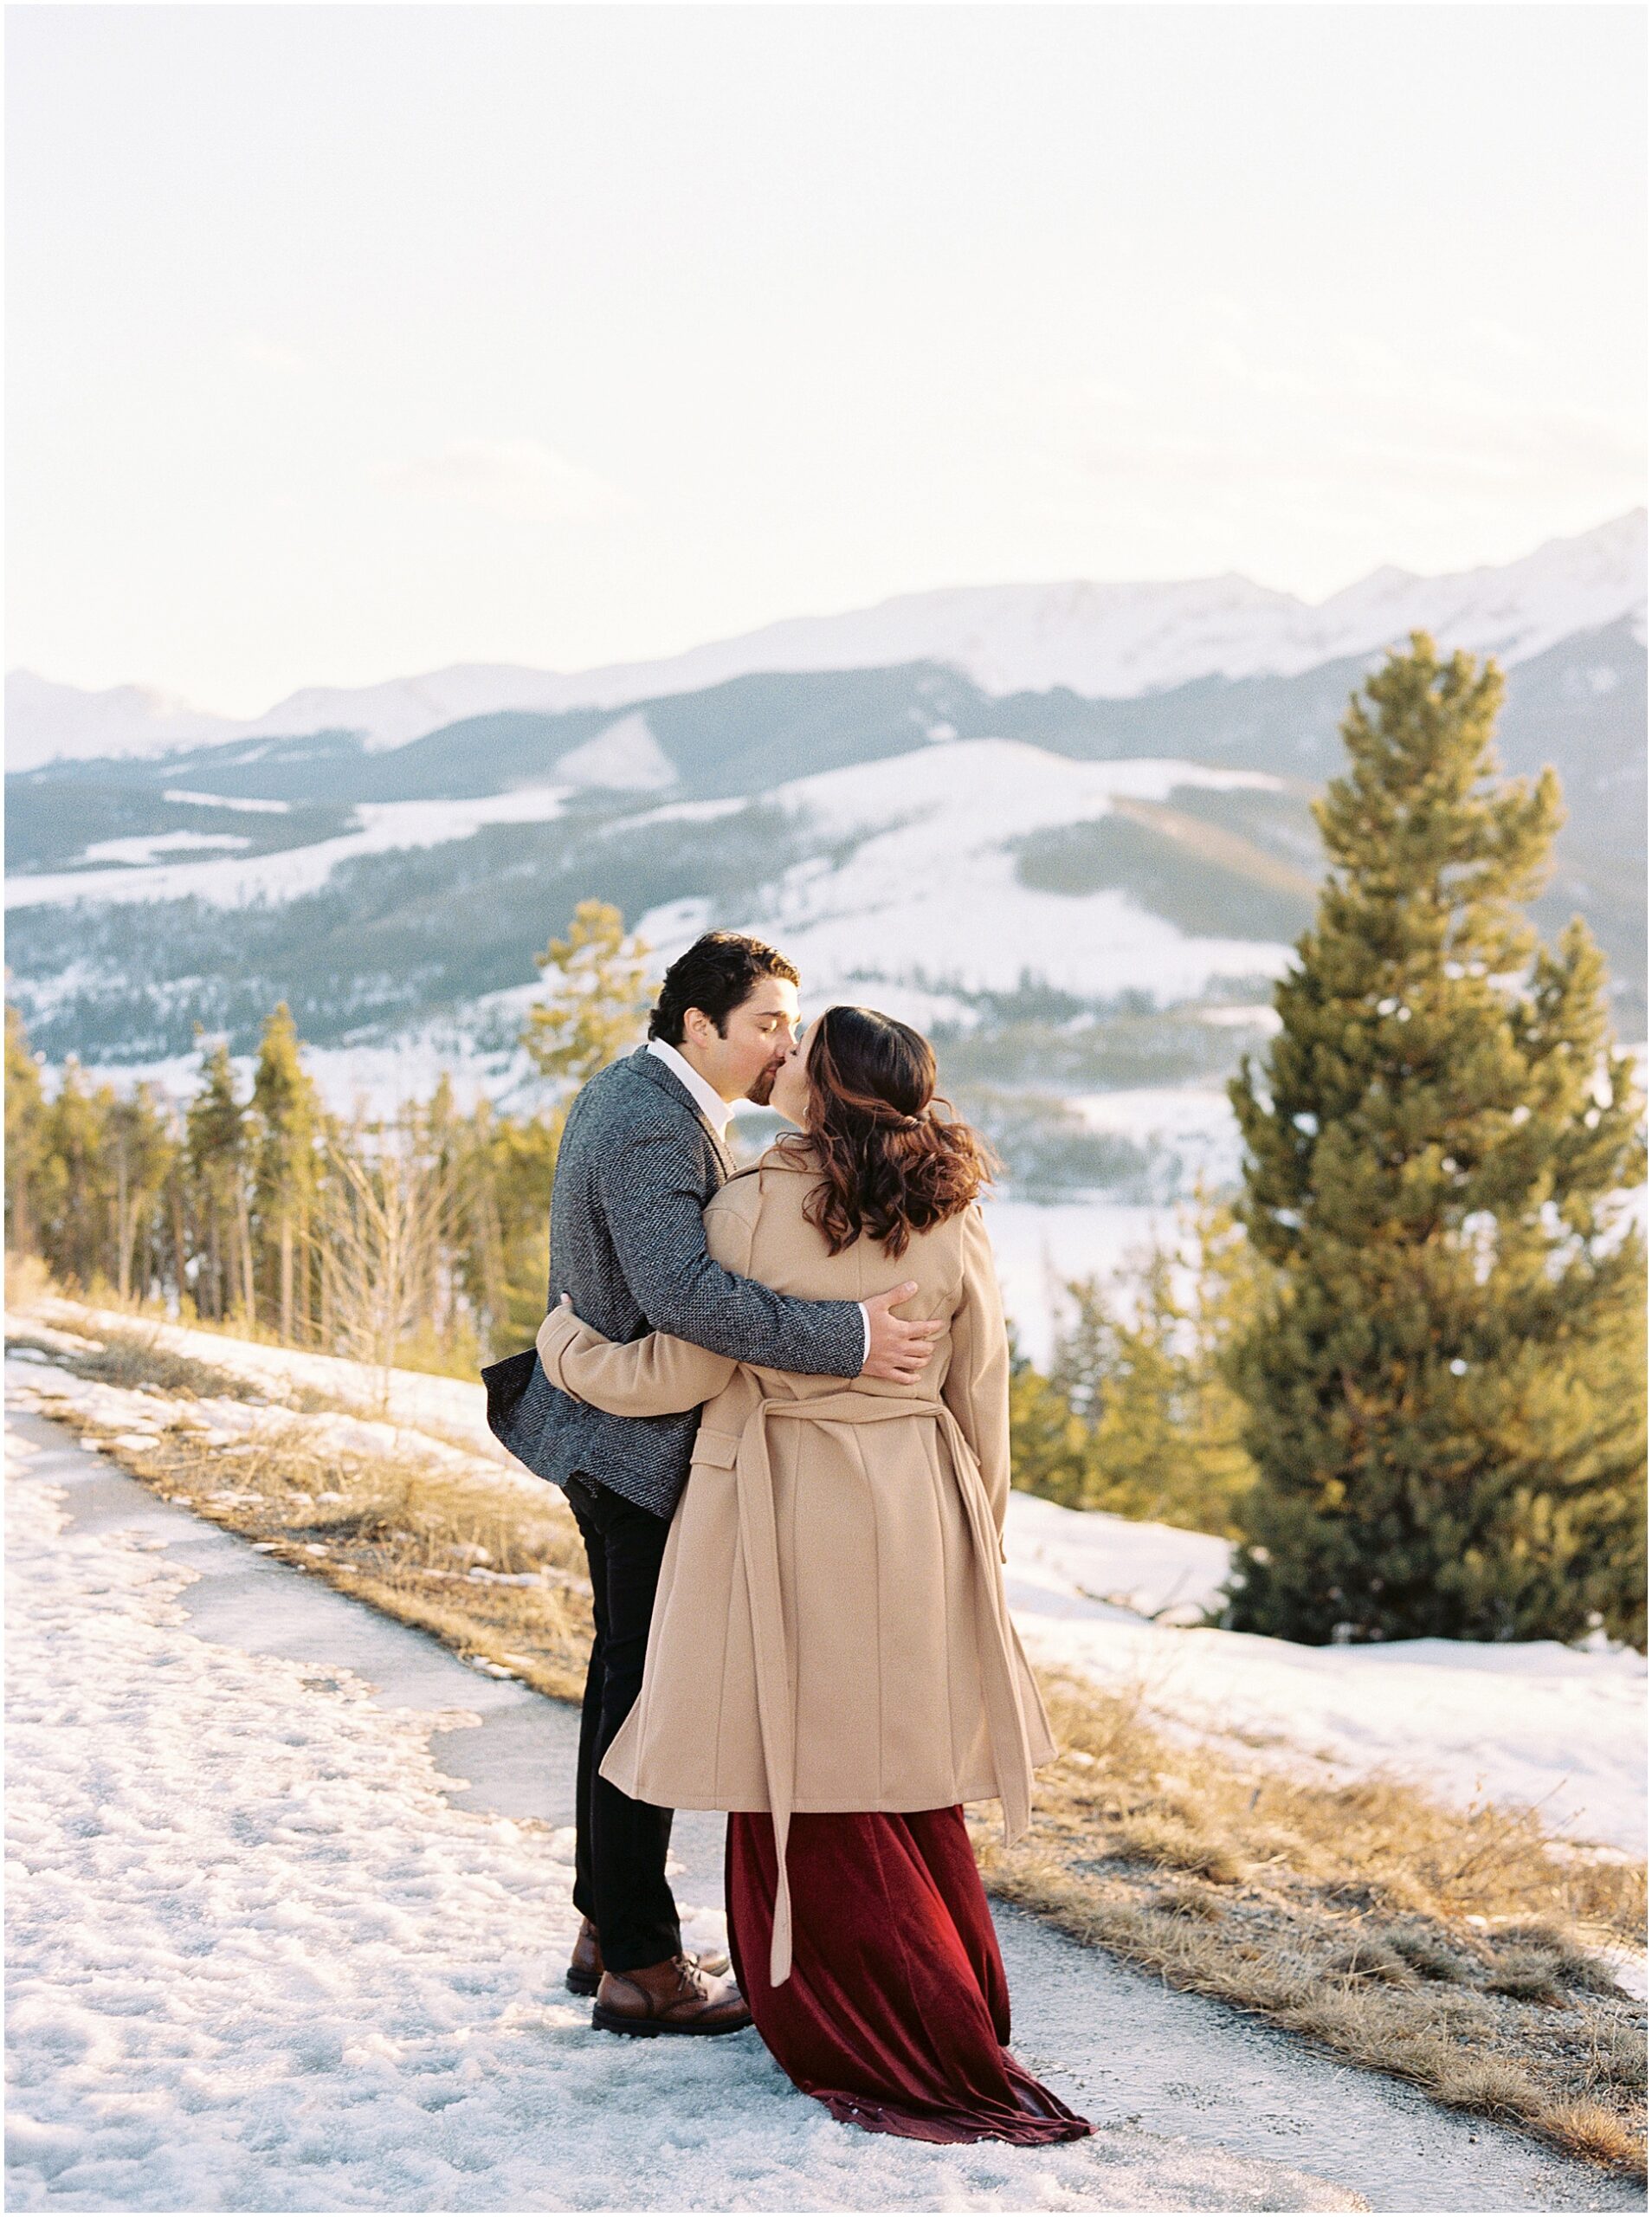 An engaged couple at Sapphire Point, Colorado, overlooking the mountains and Lake Dillon.